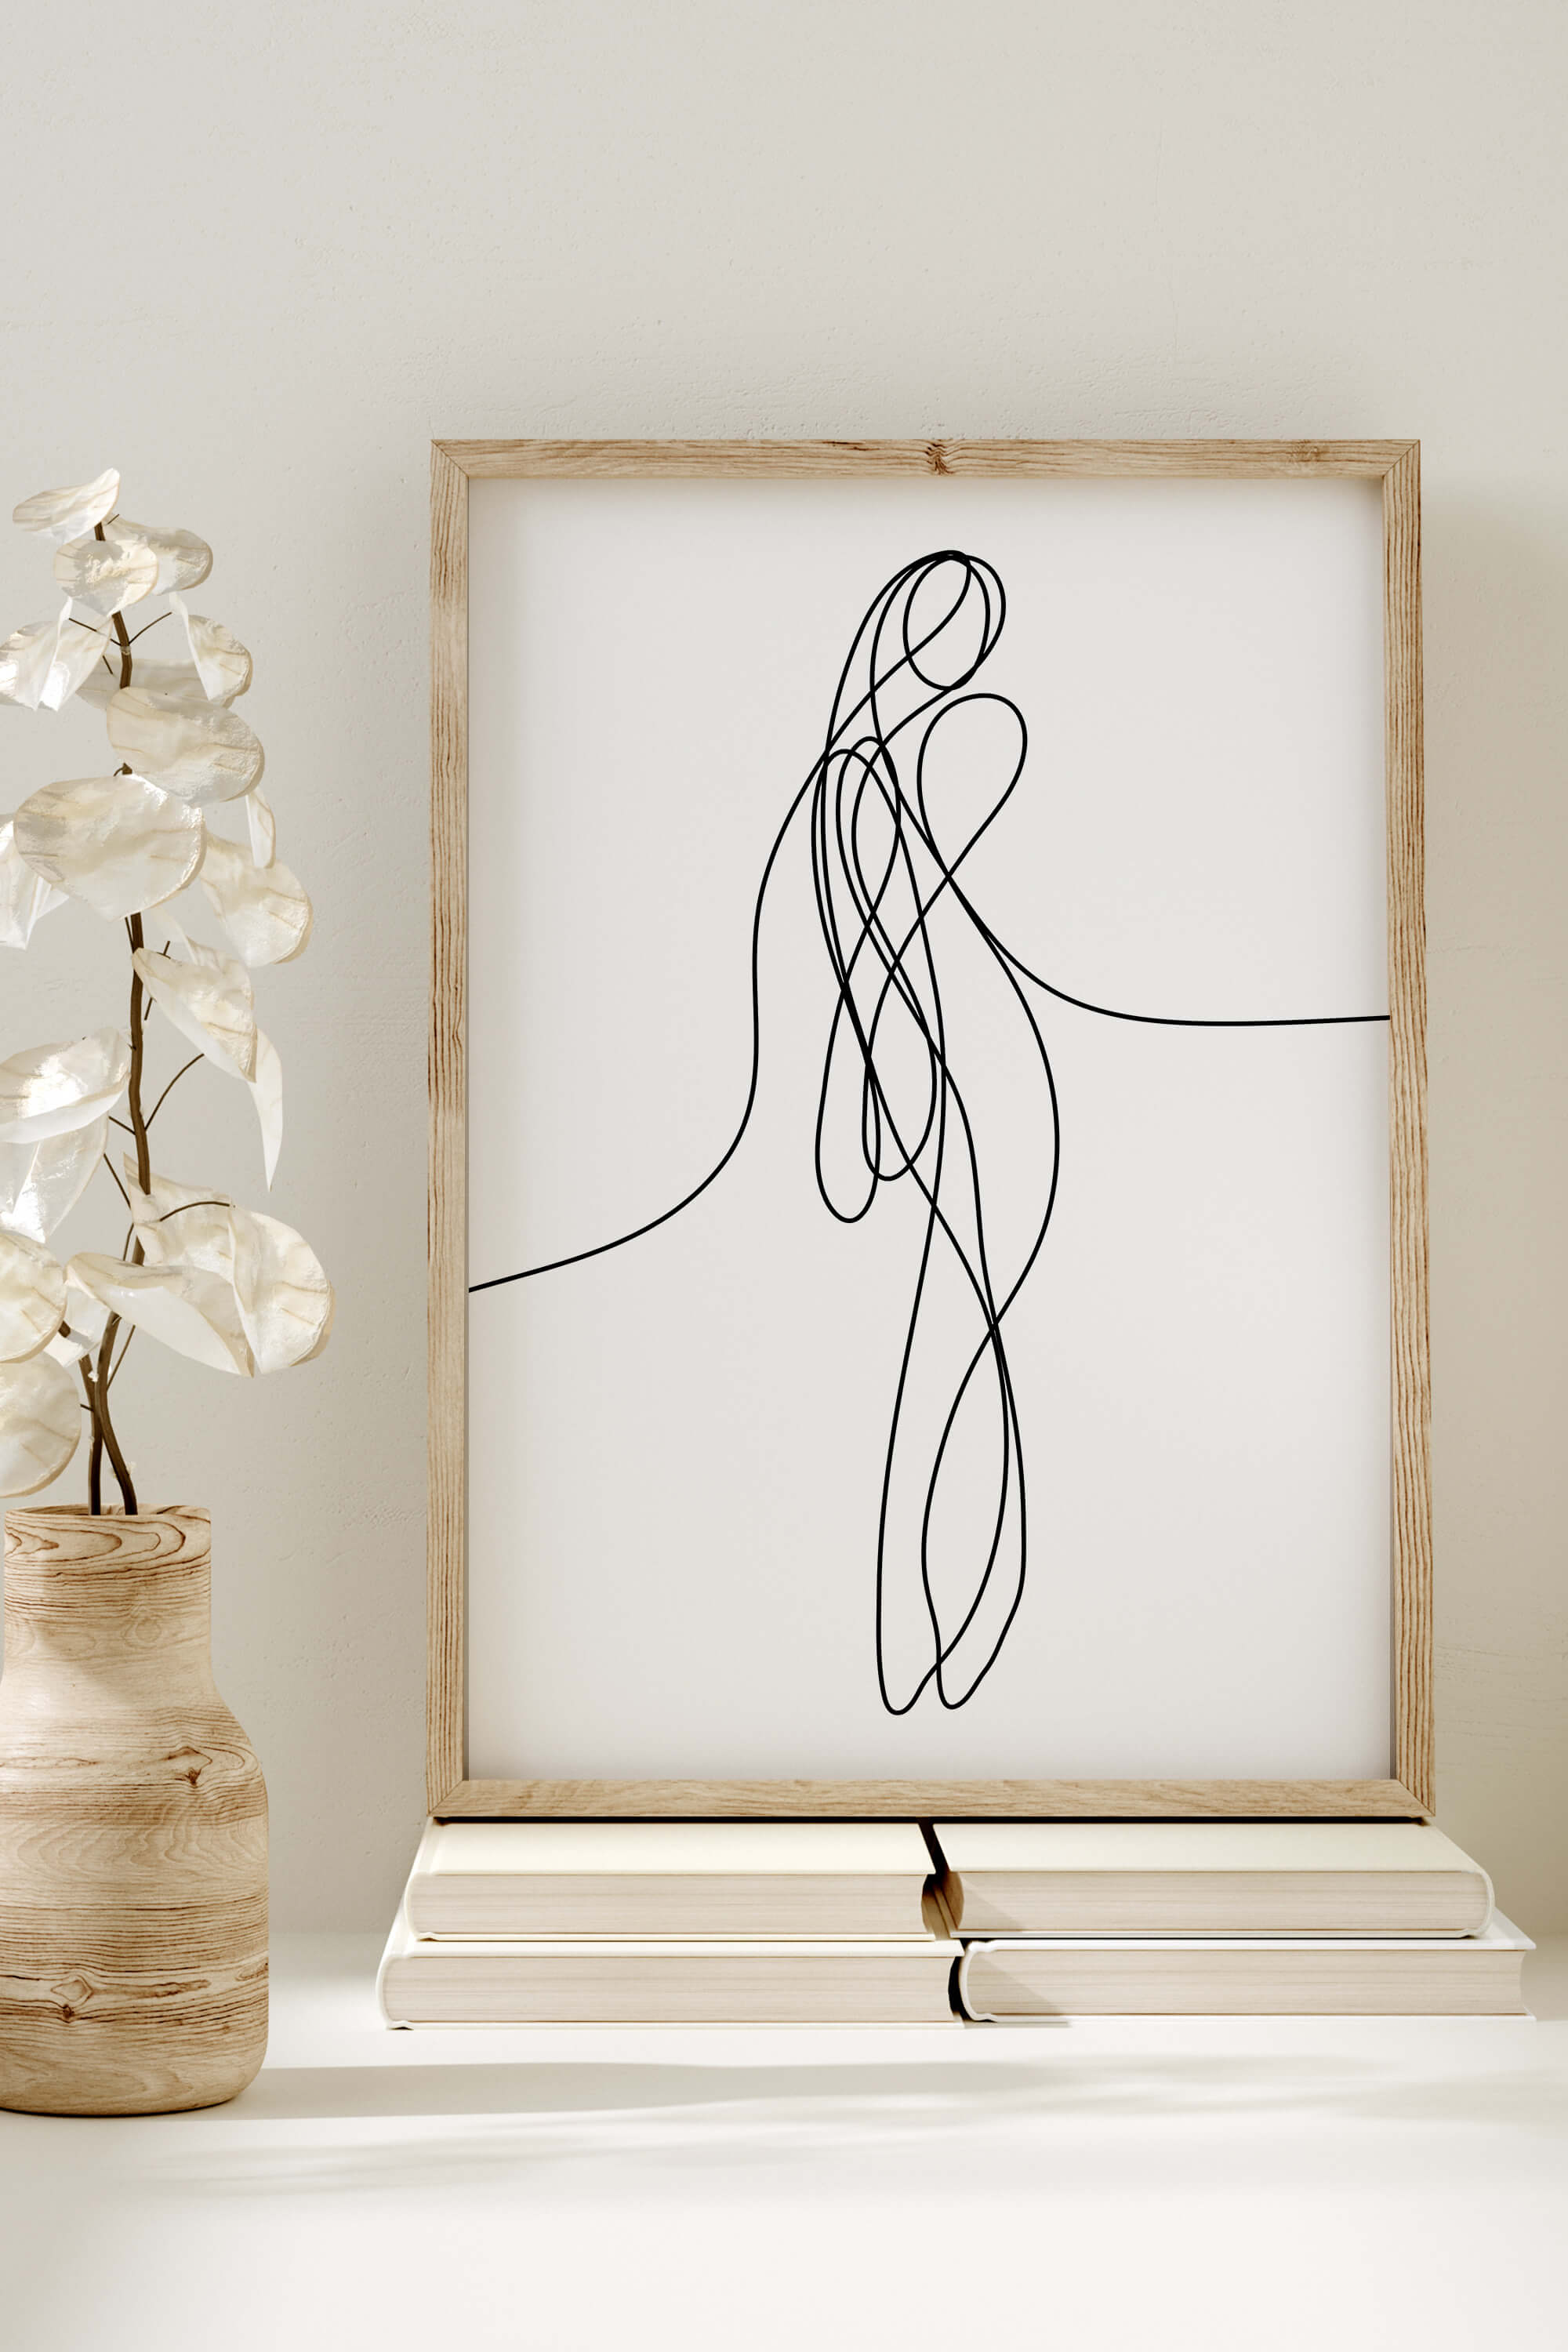 Symphony of style for your walls. Modern and unique, this art print merges body silhouettes in a captivating dance of form and expression. A statement piece for those with a taste for the extraordinary.